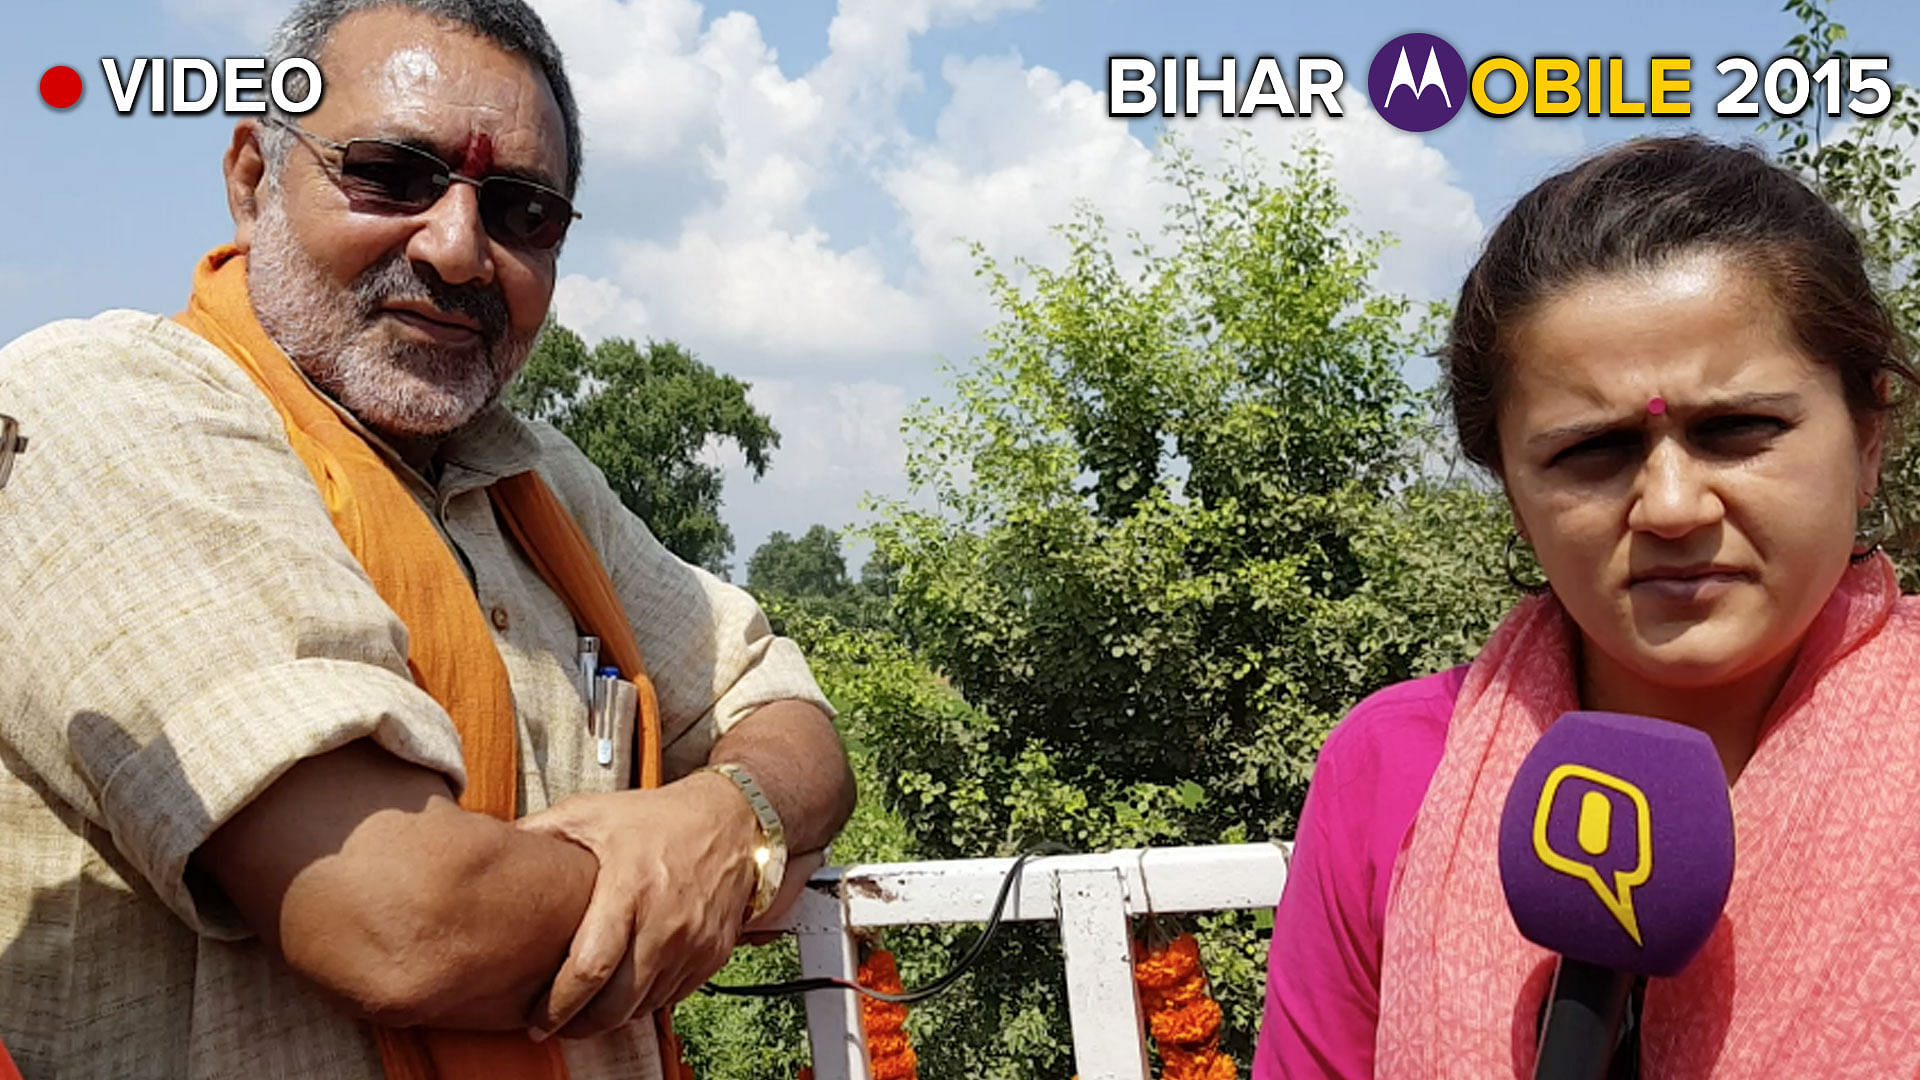 BJP leader Giriraj Singh in an exclusive interview with <b>The Quint</b>’s Rishika Baruah.